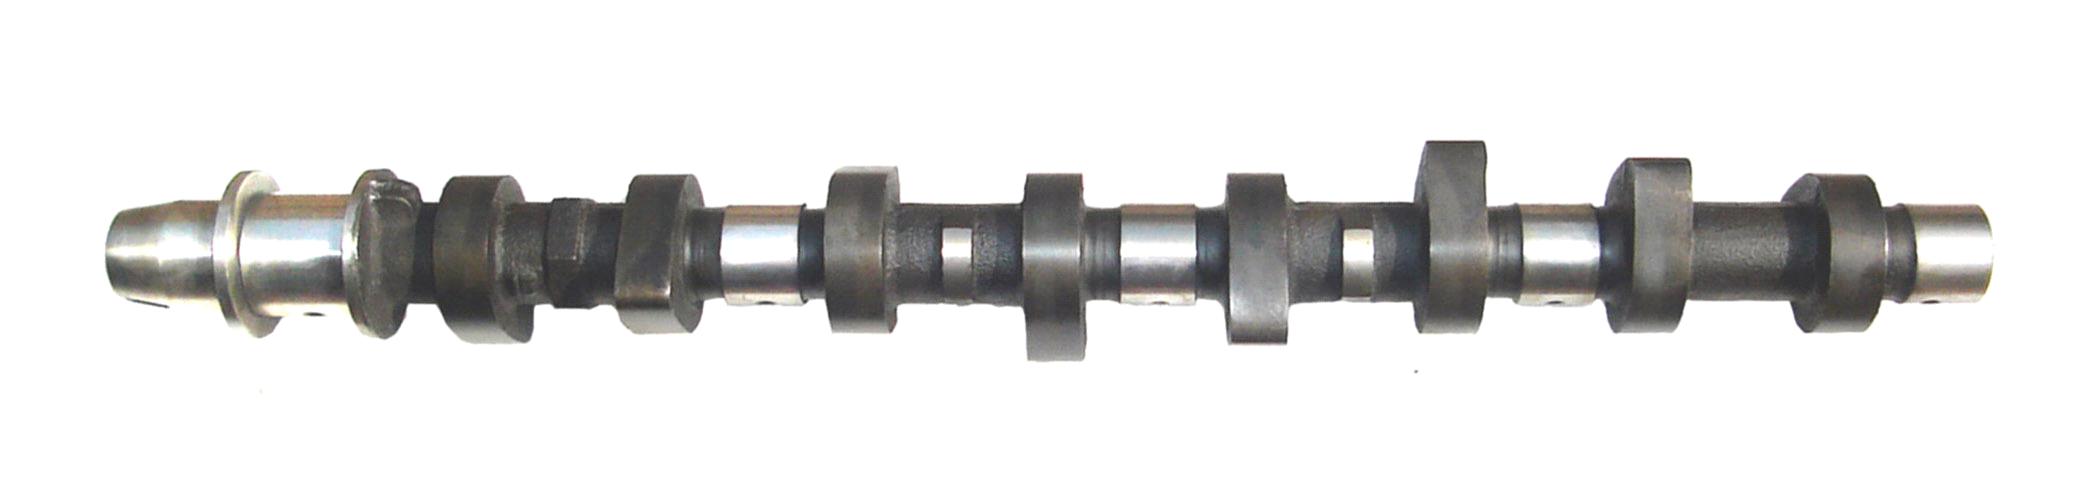 toyota camshaft parts #6